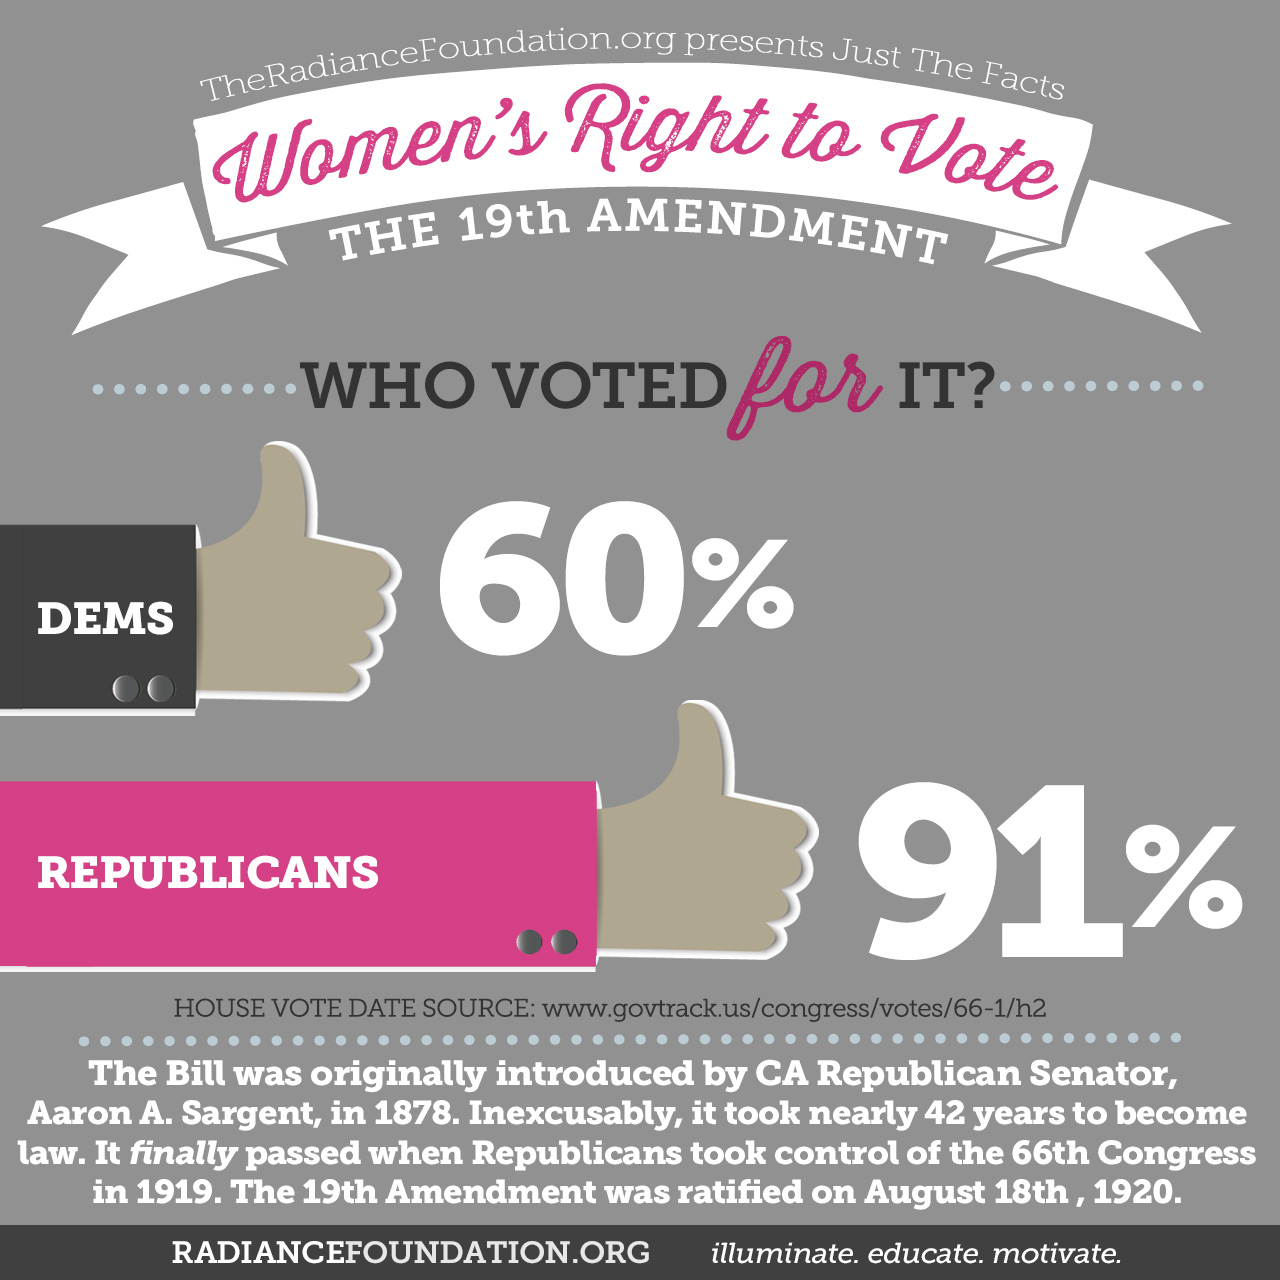 "Women's Right to Vote" by The Radiance Foundation